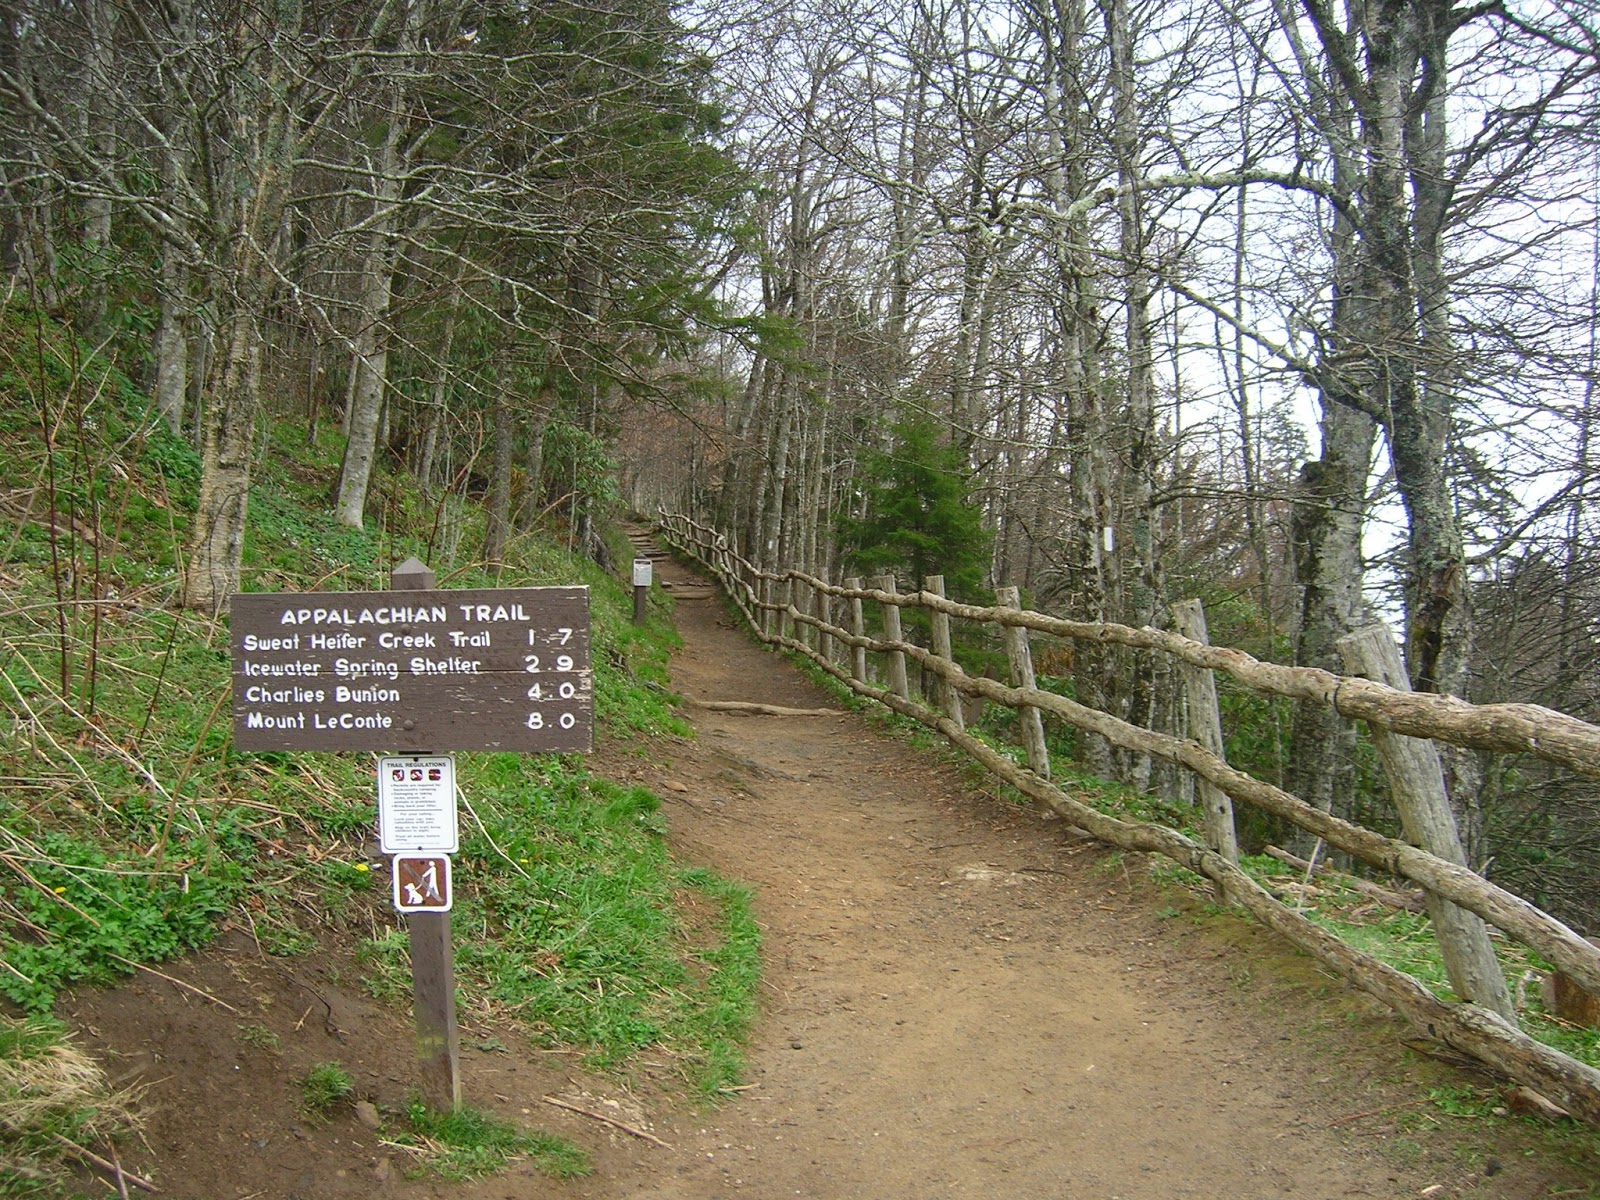 The Appalachian Trail begins in the north Georgia mountains  (60 miles N of Atlanta) and traverses the Appalchian range, ending approx. 2,200 miles away in Northern Maine